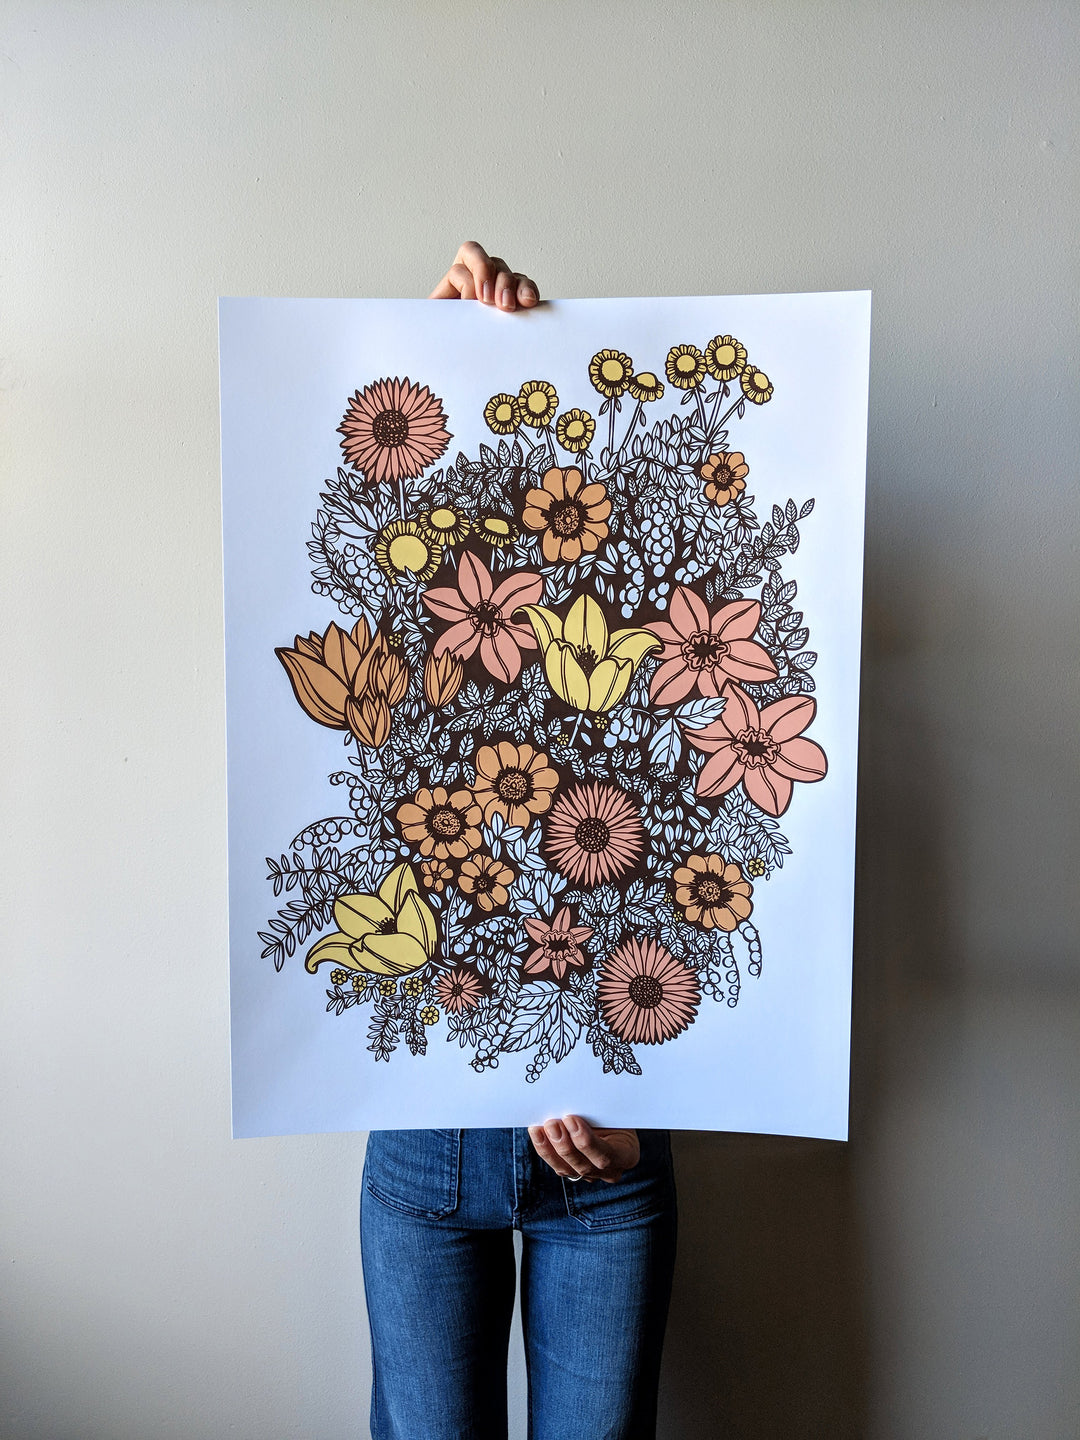 Overgrowth Floral Print in Warm Tones by Brainstorm